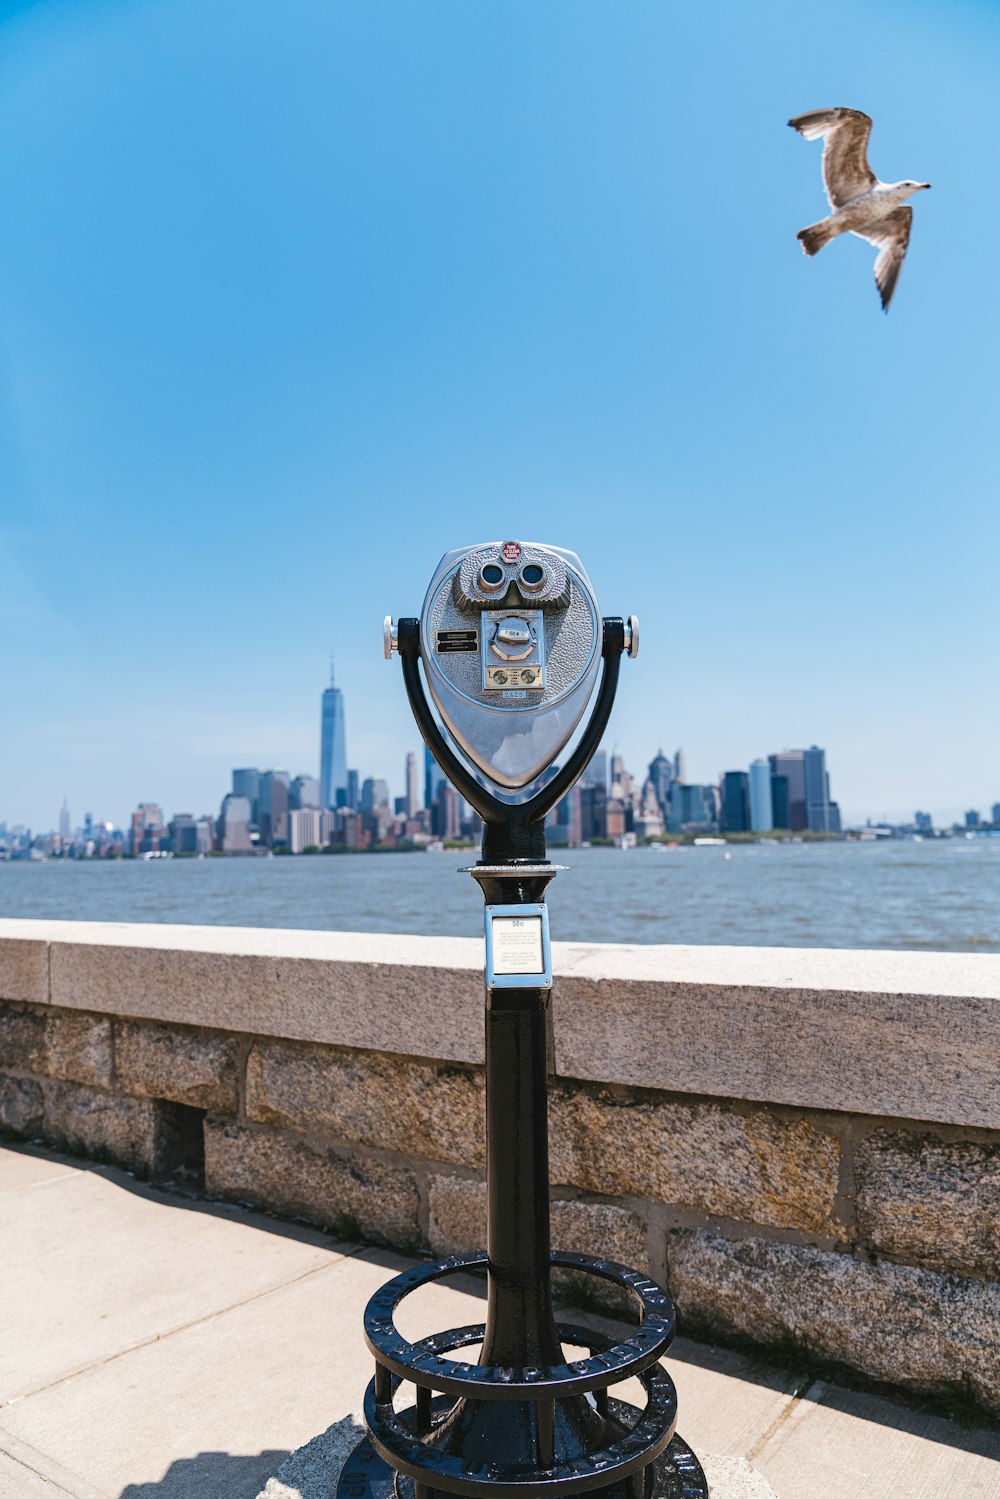 gray coin-operated telescope near pathway and seagull bird flying in the sky viewing New York City under blue and white sky